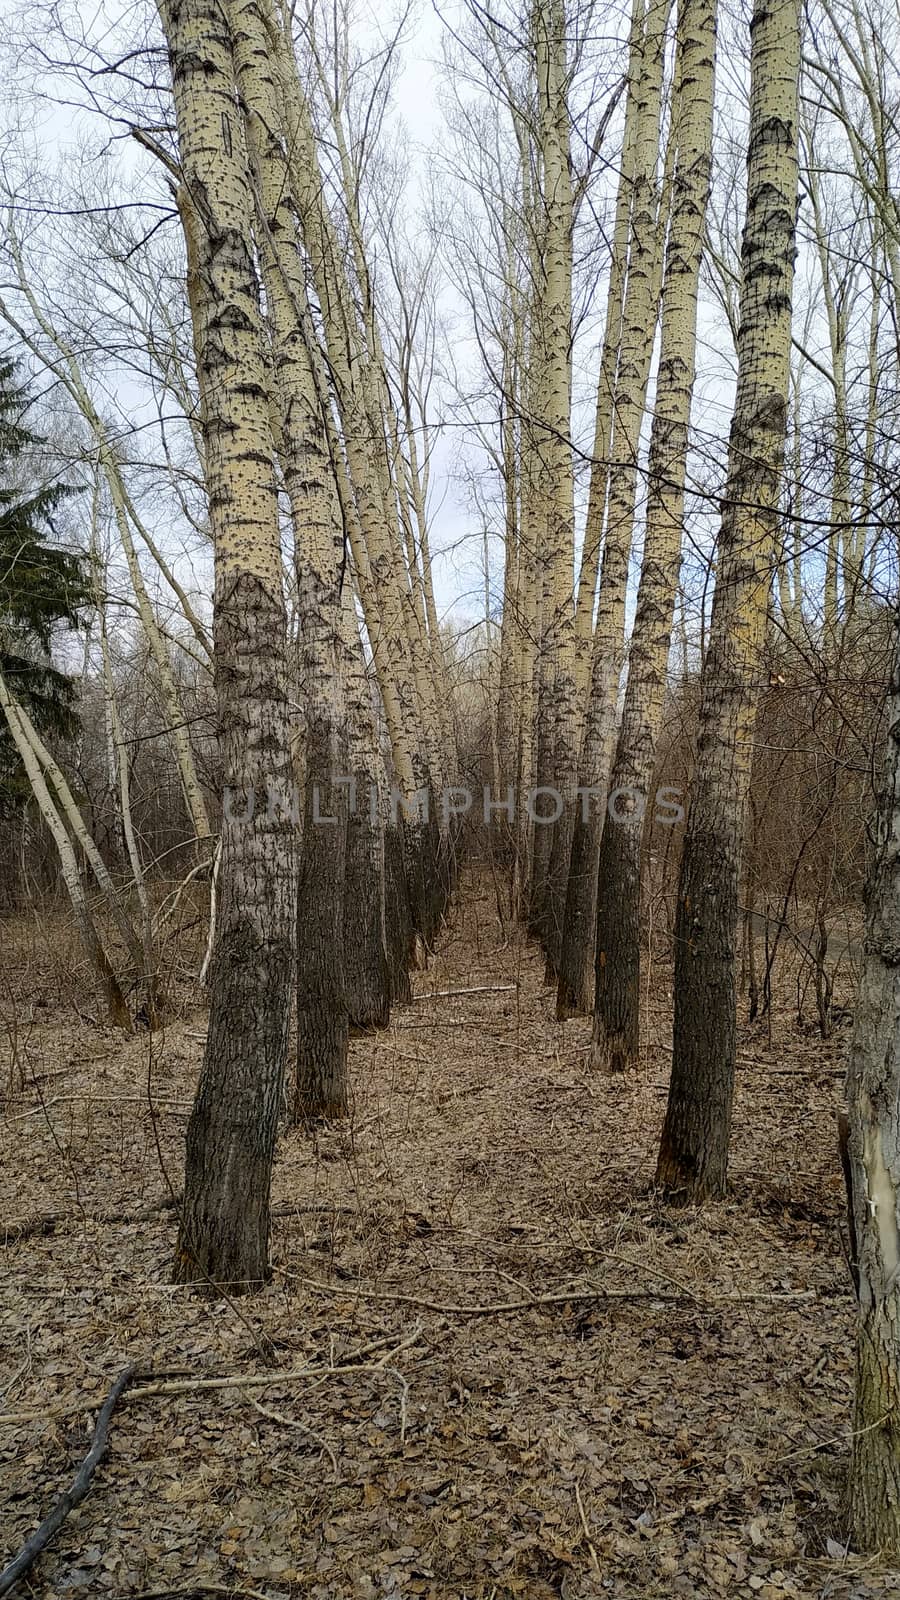 Two rows of poplars form an alley in the forest.